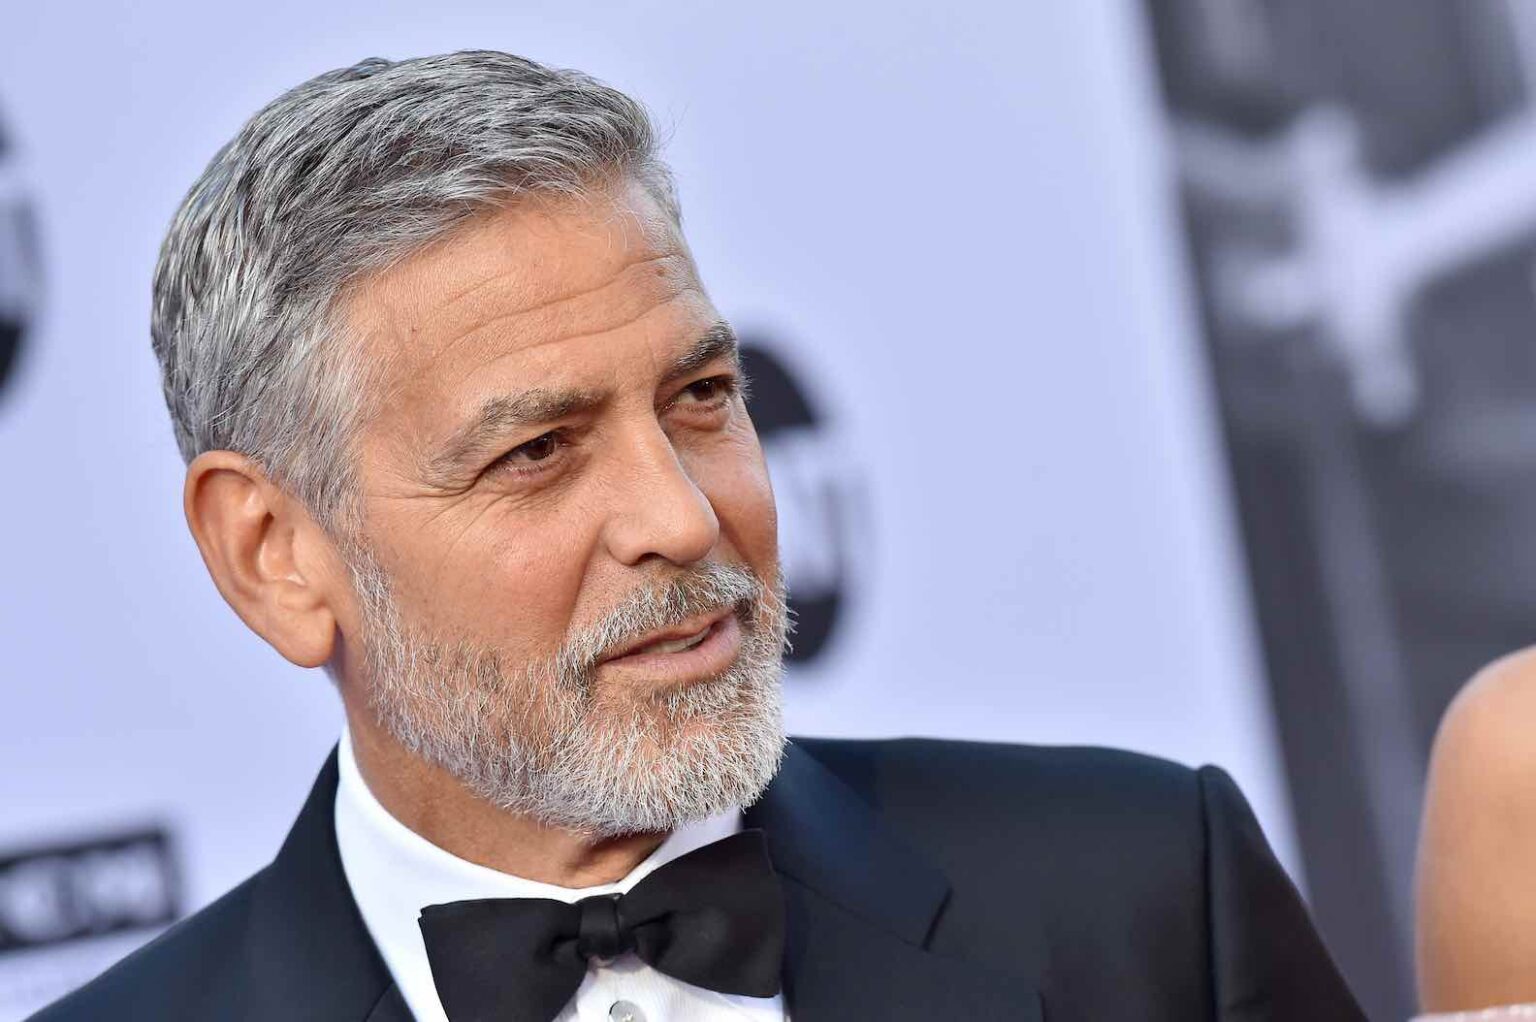 George Clooney's marriage to his wife Amal Alamuddin was a big deal to the press. Are the rumors he cheated on her with Ghislaine Maxwell true?